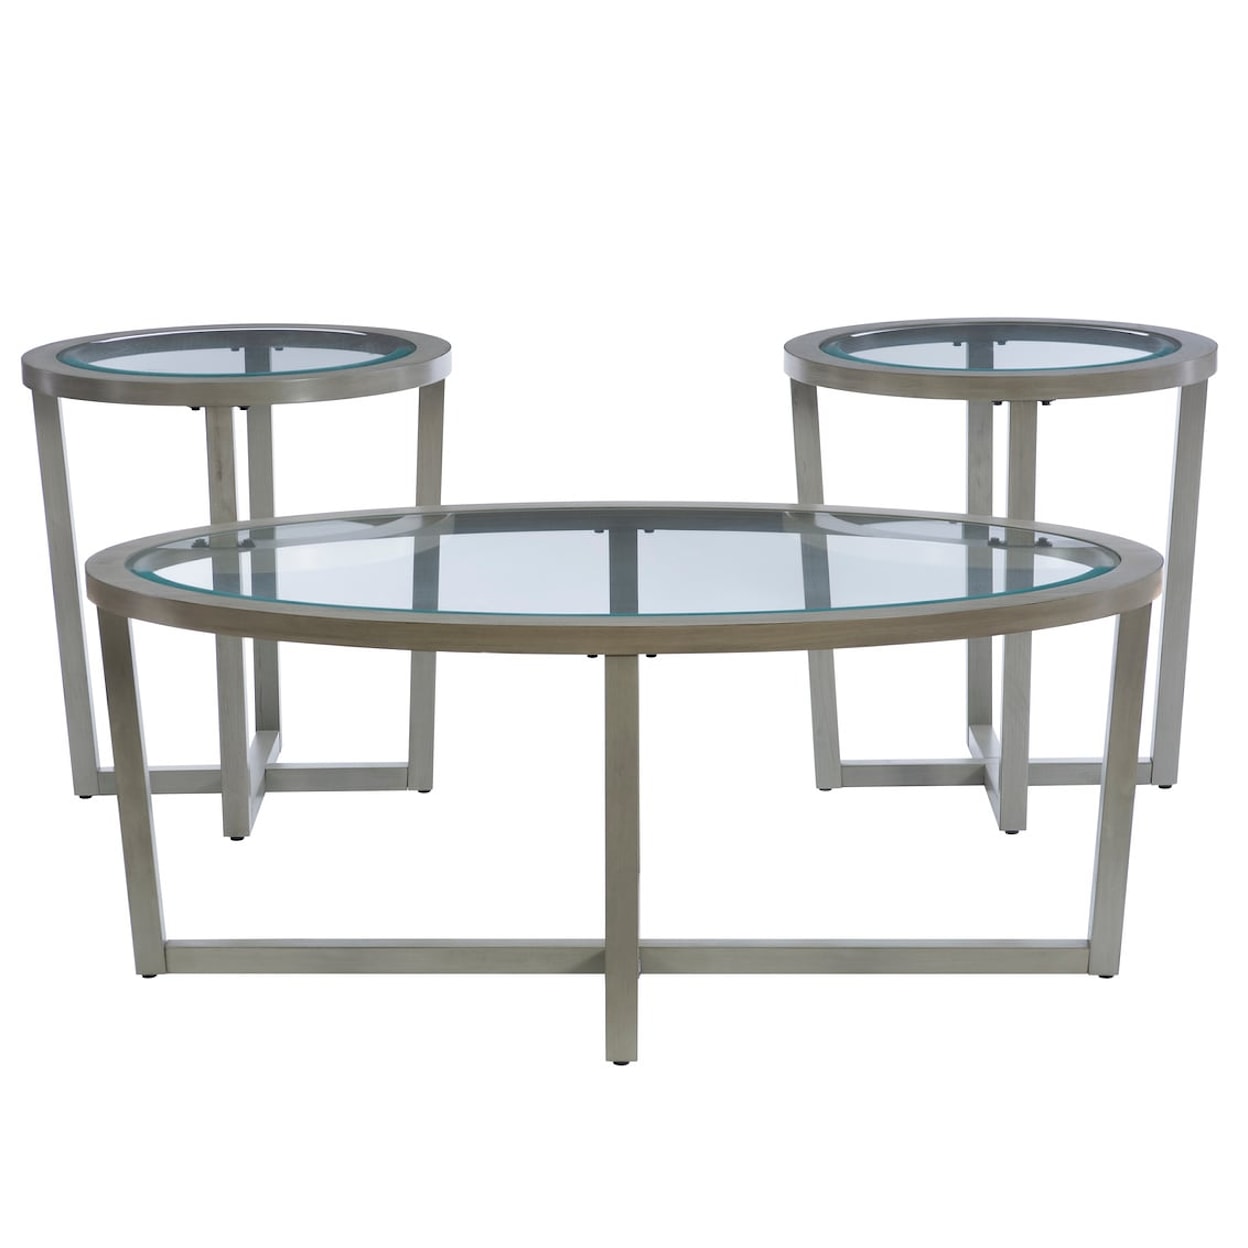 LaHave Furniture Bowen Coffee Table & 2 End Tables